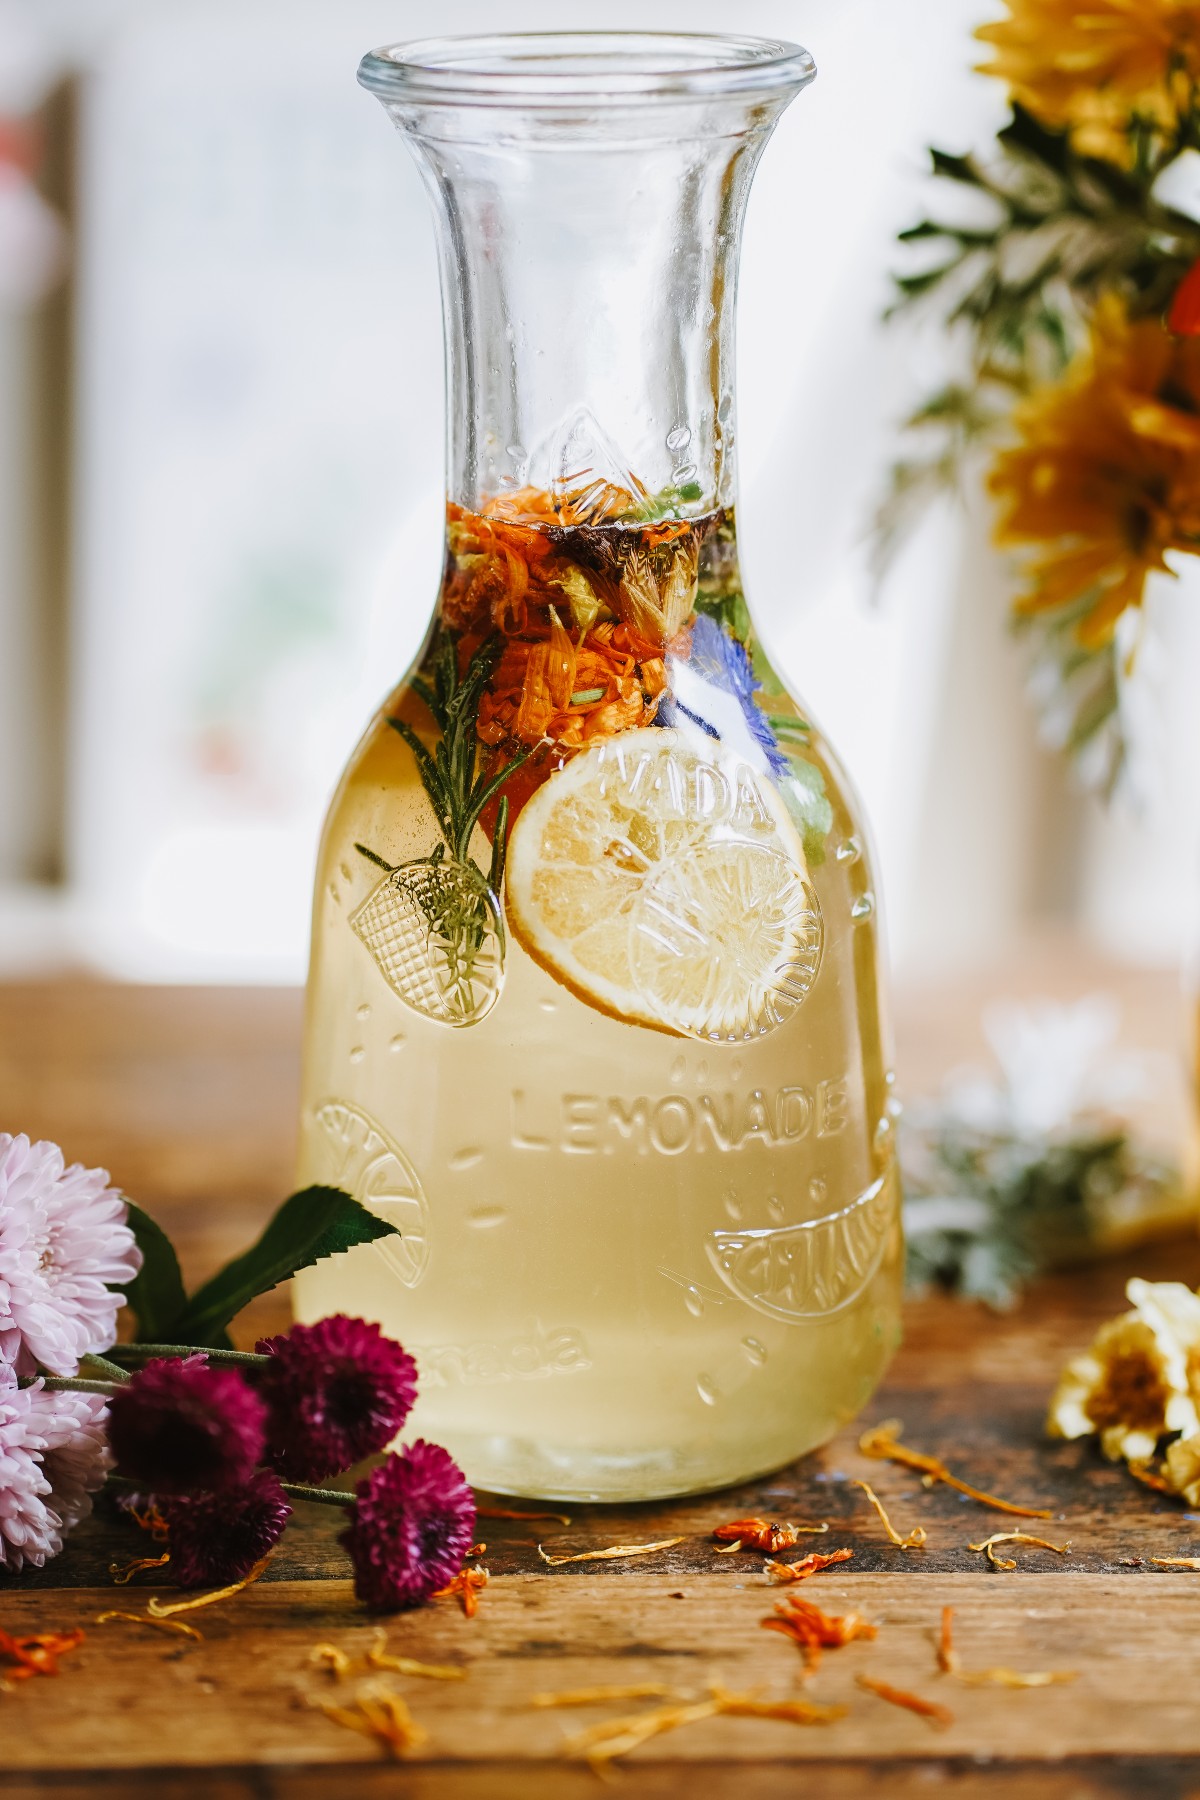 How to Make A Wildflower Cordial | Herbal Academy | Wildflowers and wild fermentation come together to create a delicious and delightful spring-inspired cordial.